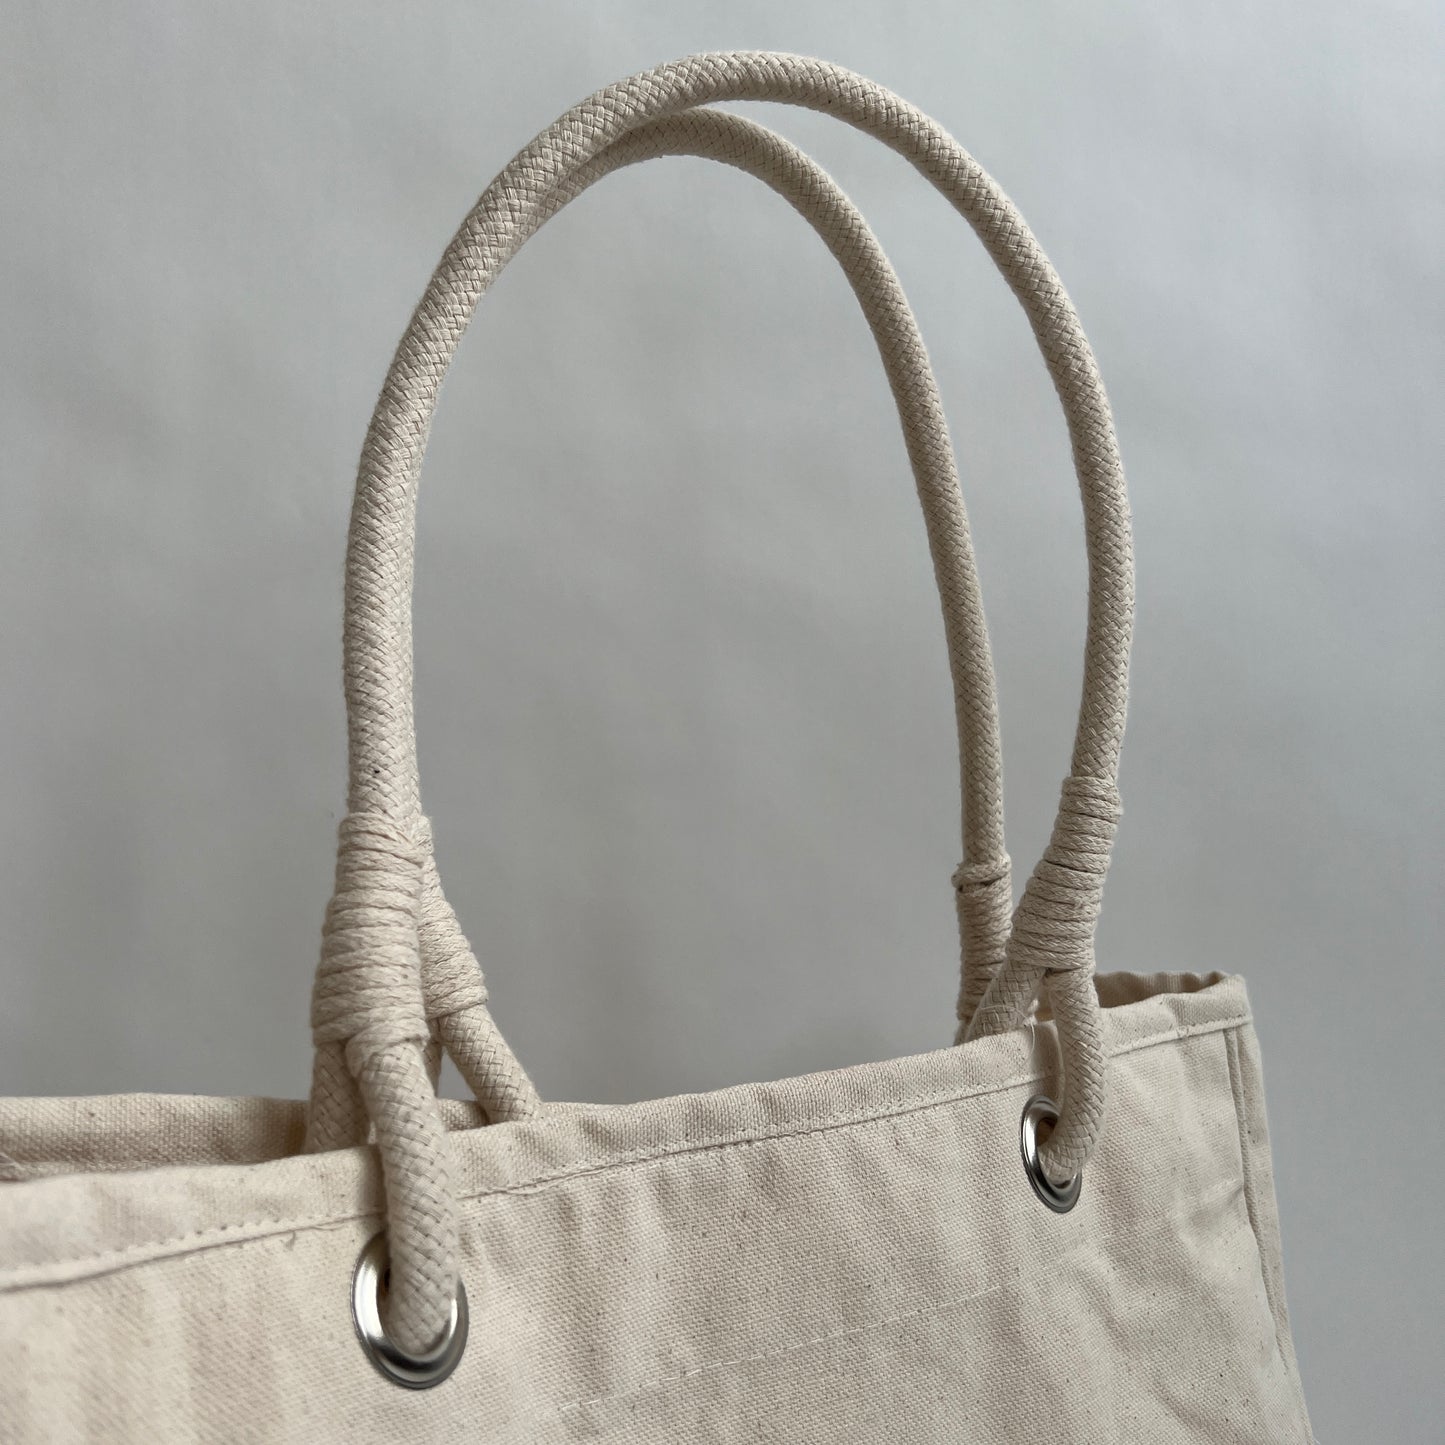 The Cherry Pit Tote